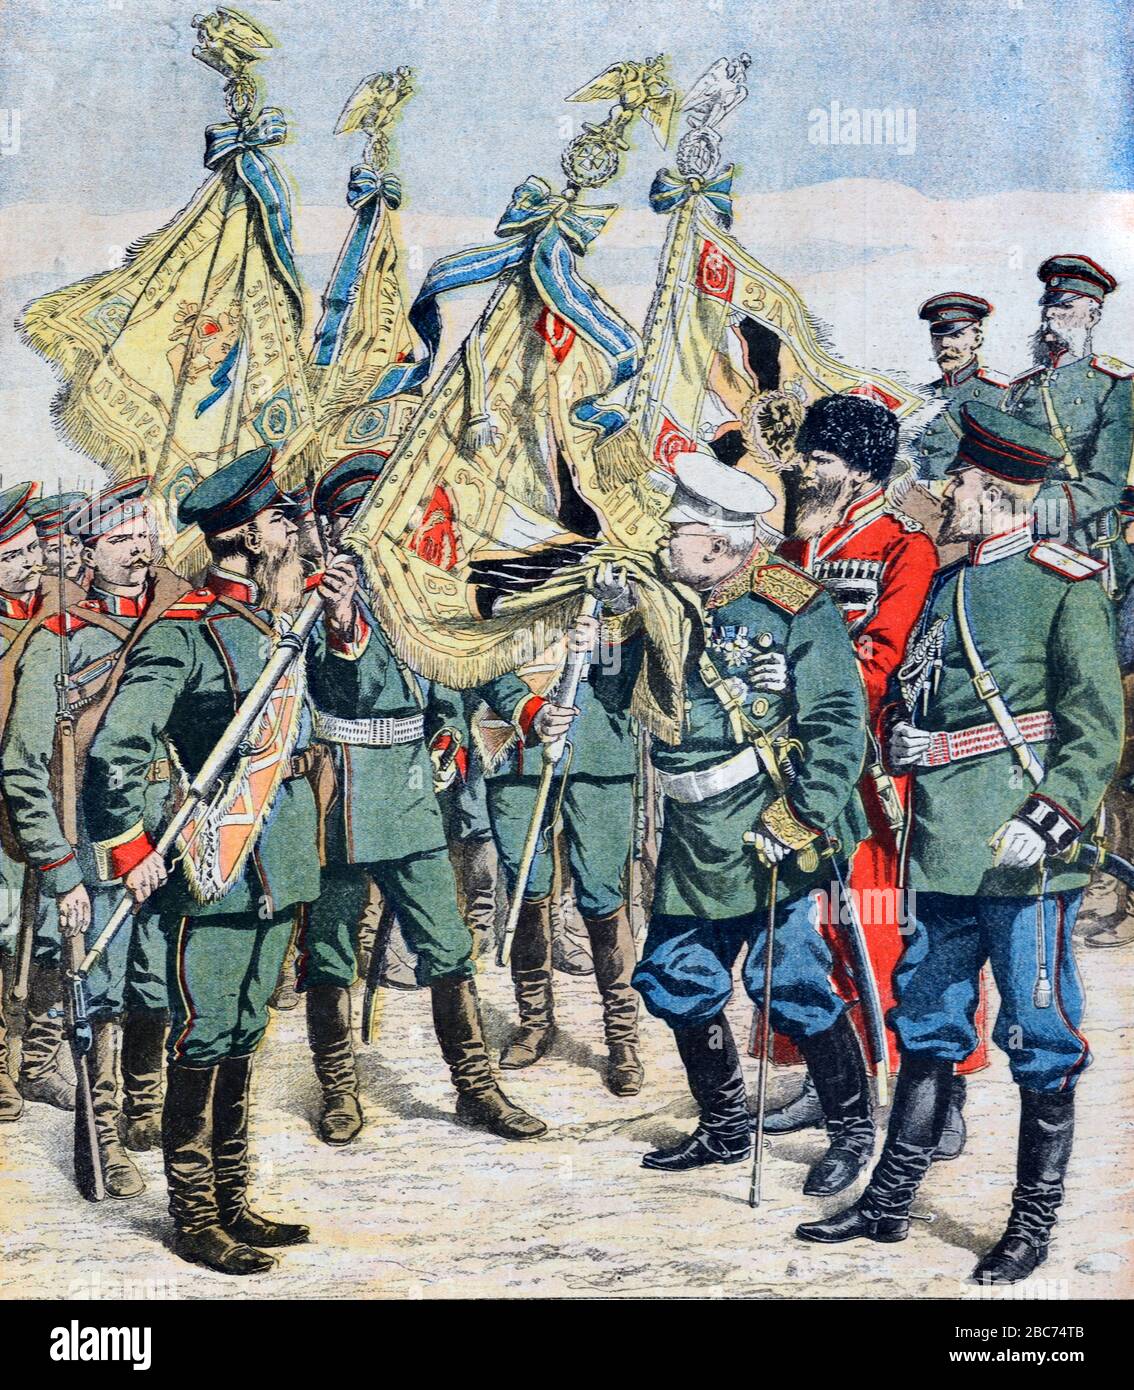 Russian General Mikhail Ivanovich Dragomirov (1830-1905) Kisses the Russian Flag Before Russian Troops Leave for the Russo-Japanese War (1904-1905) Vintage Illustration or Engraving Oct 1904 Stock Photo